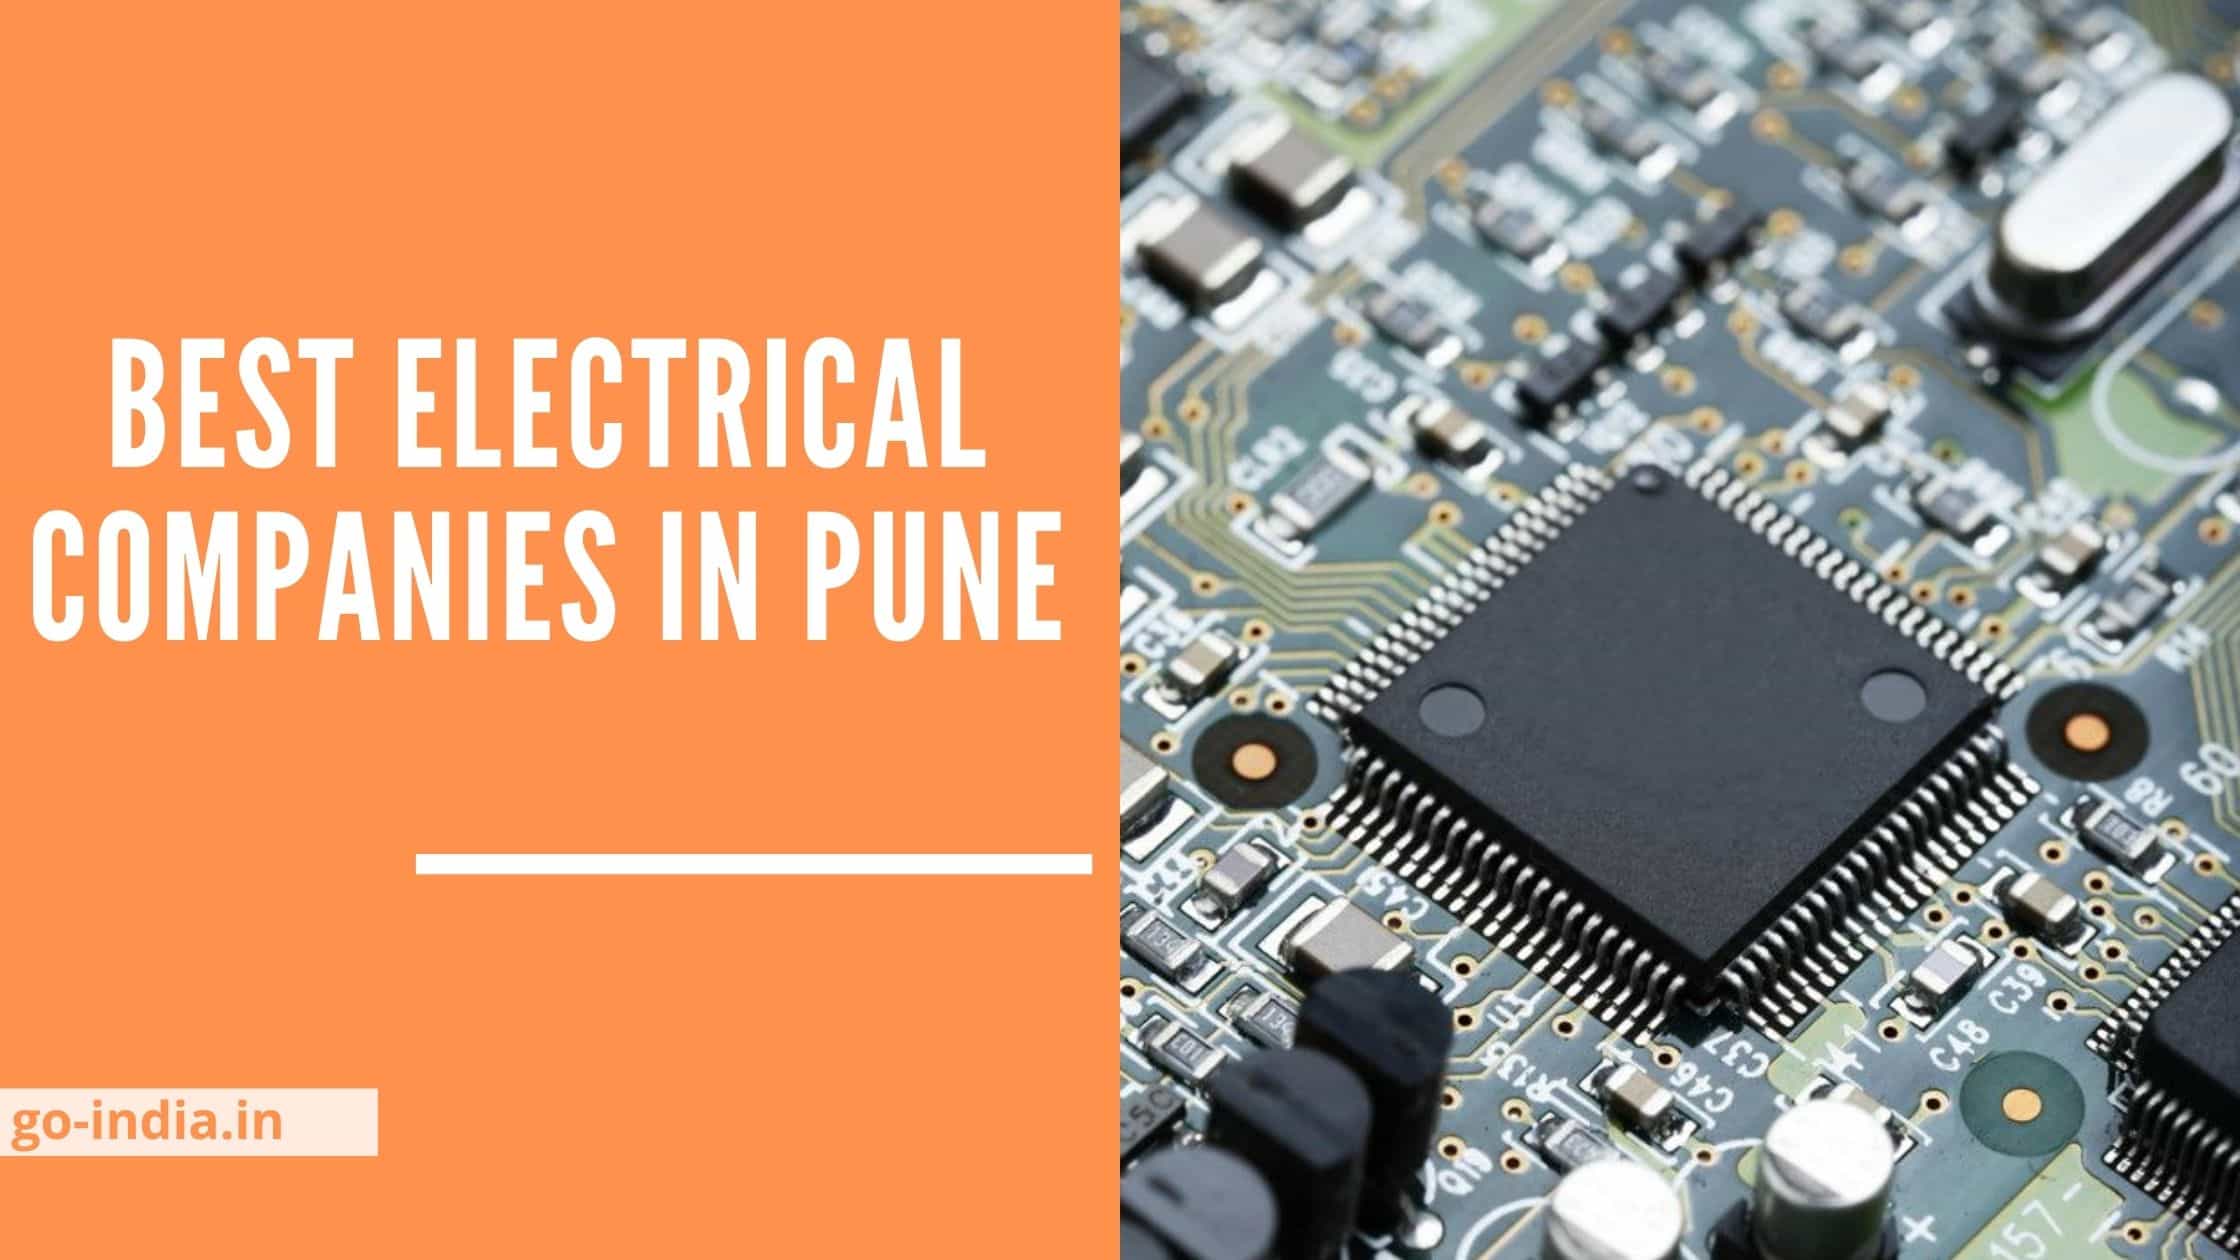 List of Best Electrical Companies in Pune